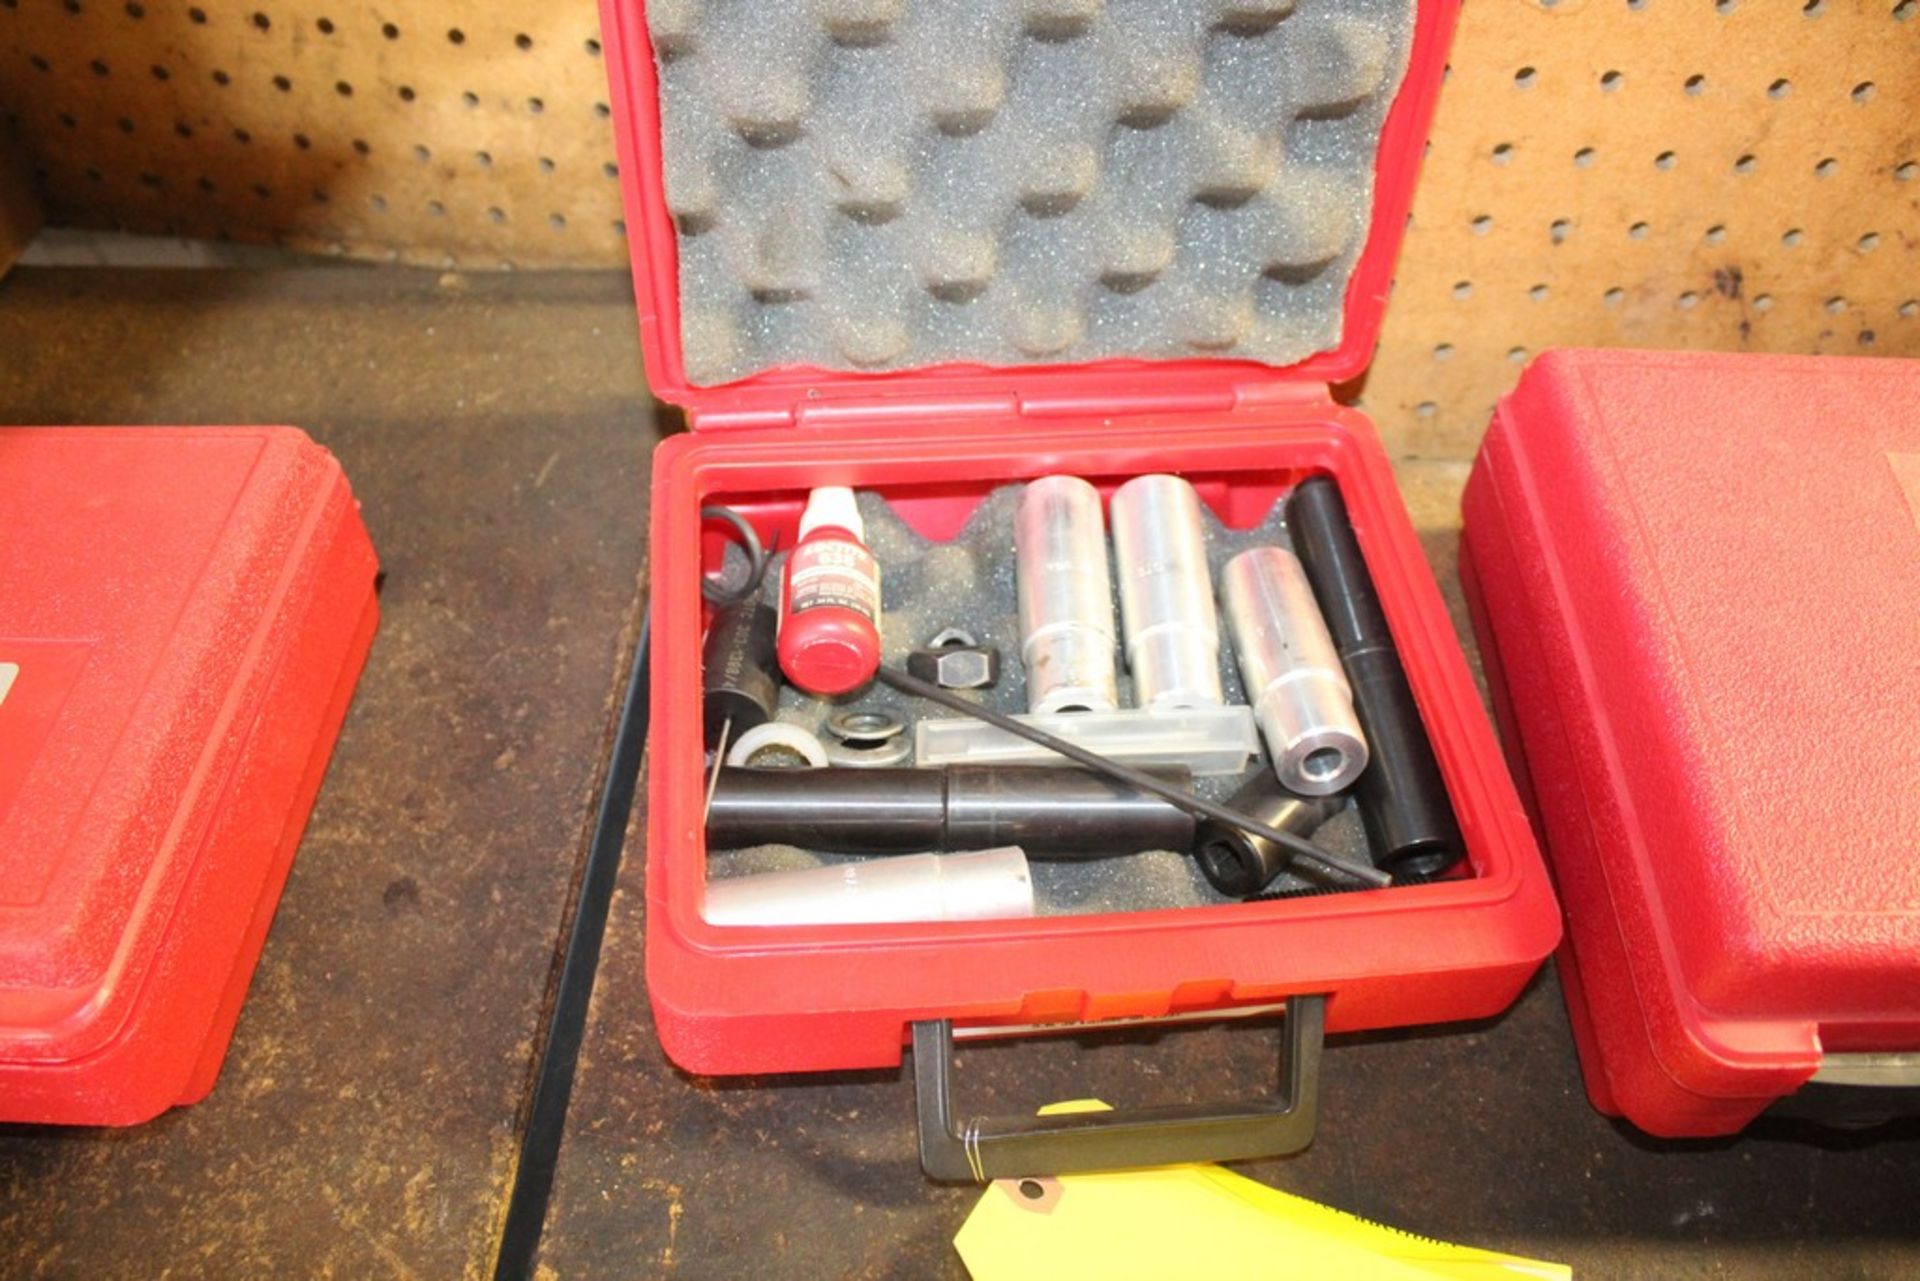 5.4L 3V ENGINE S/P FORD ROTUNDA ESSENTIAL SERVICE TOOL SET-TKIT-2006SP-FLM IN CASE - Image 2 of 2